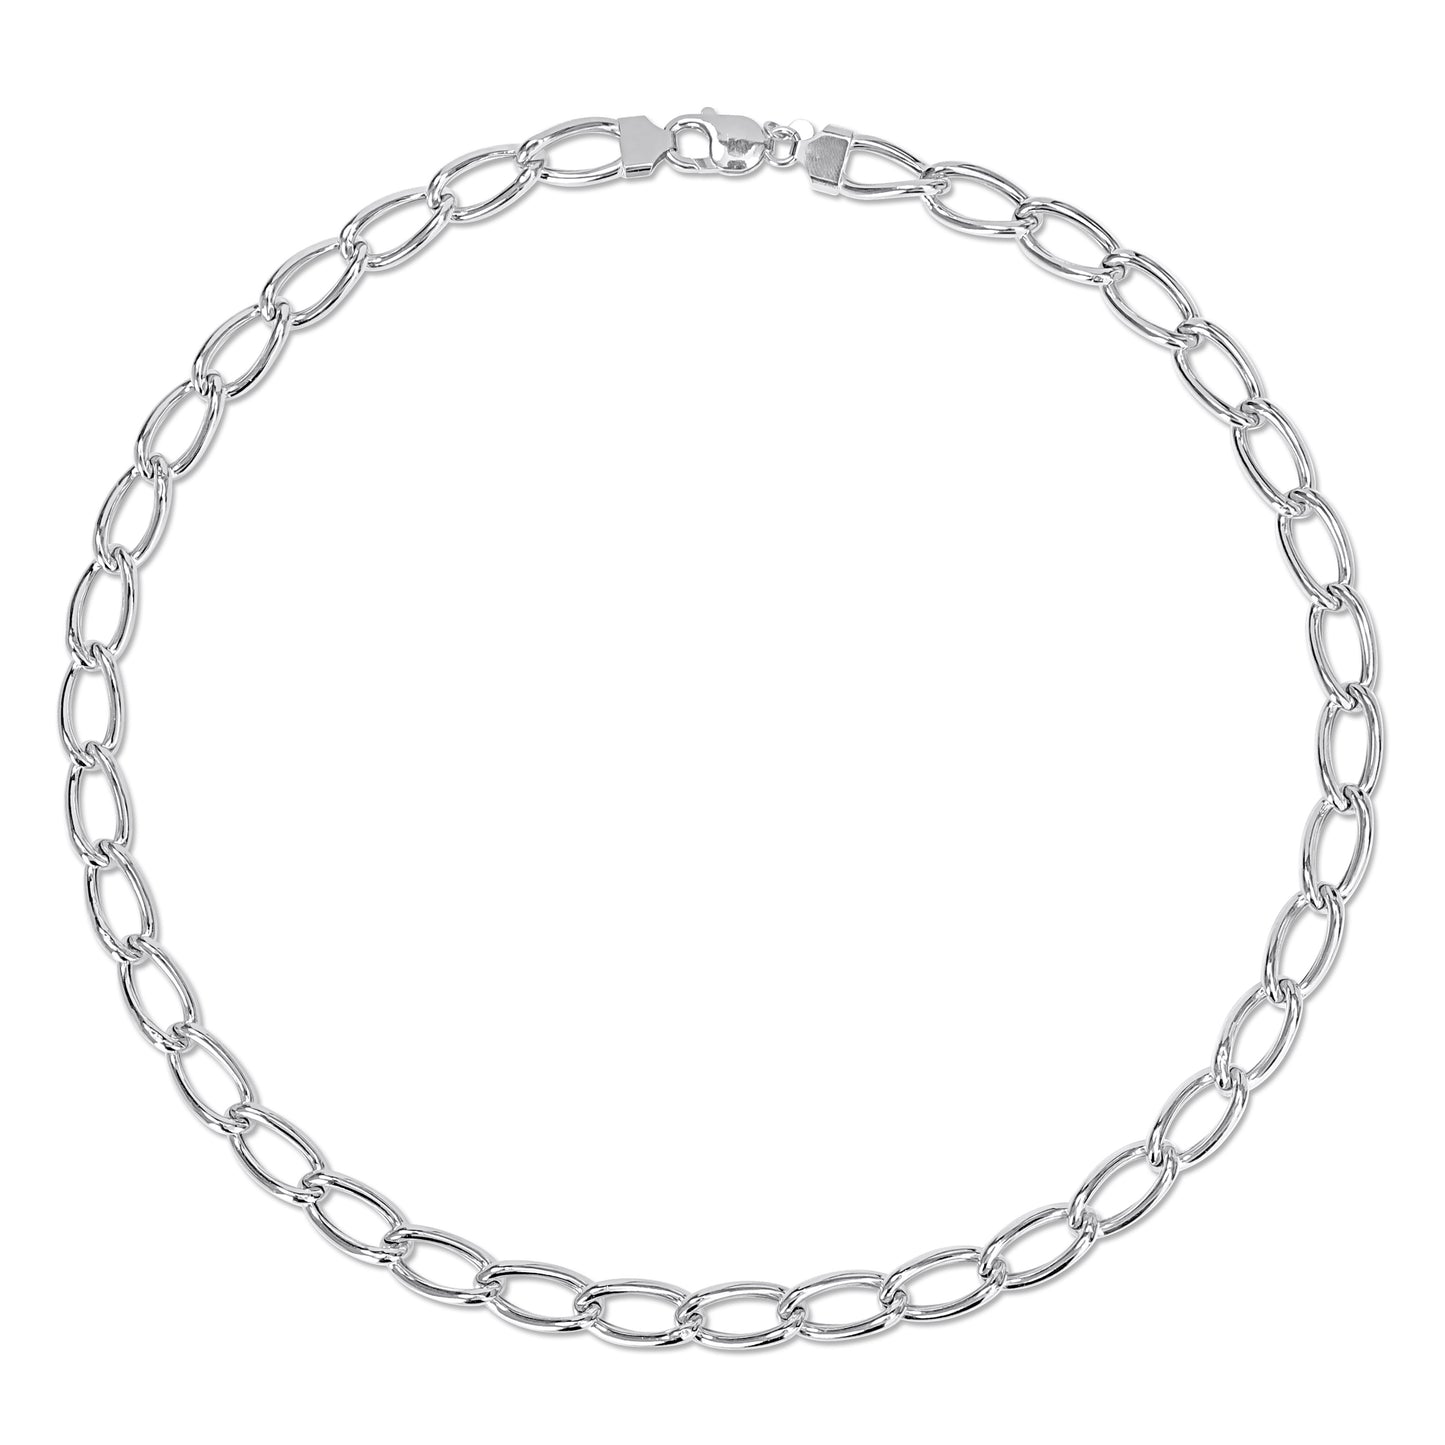 Sterling Silver Hallow Chain in 8mm